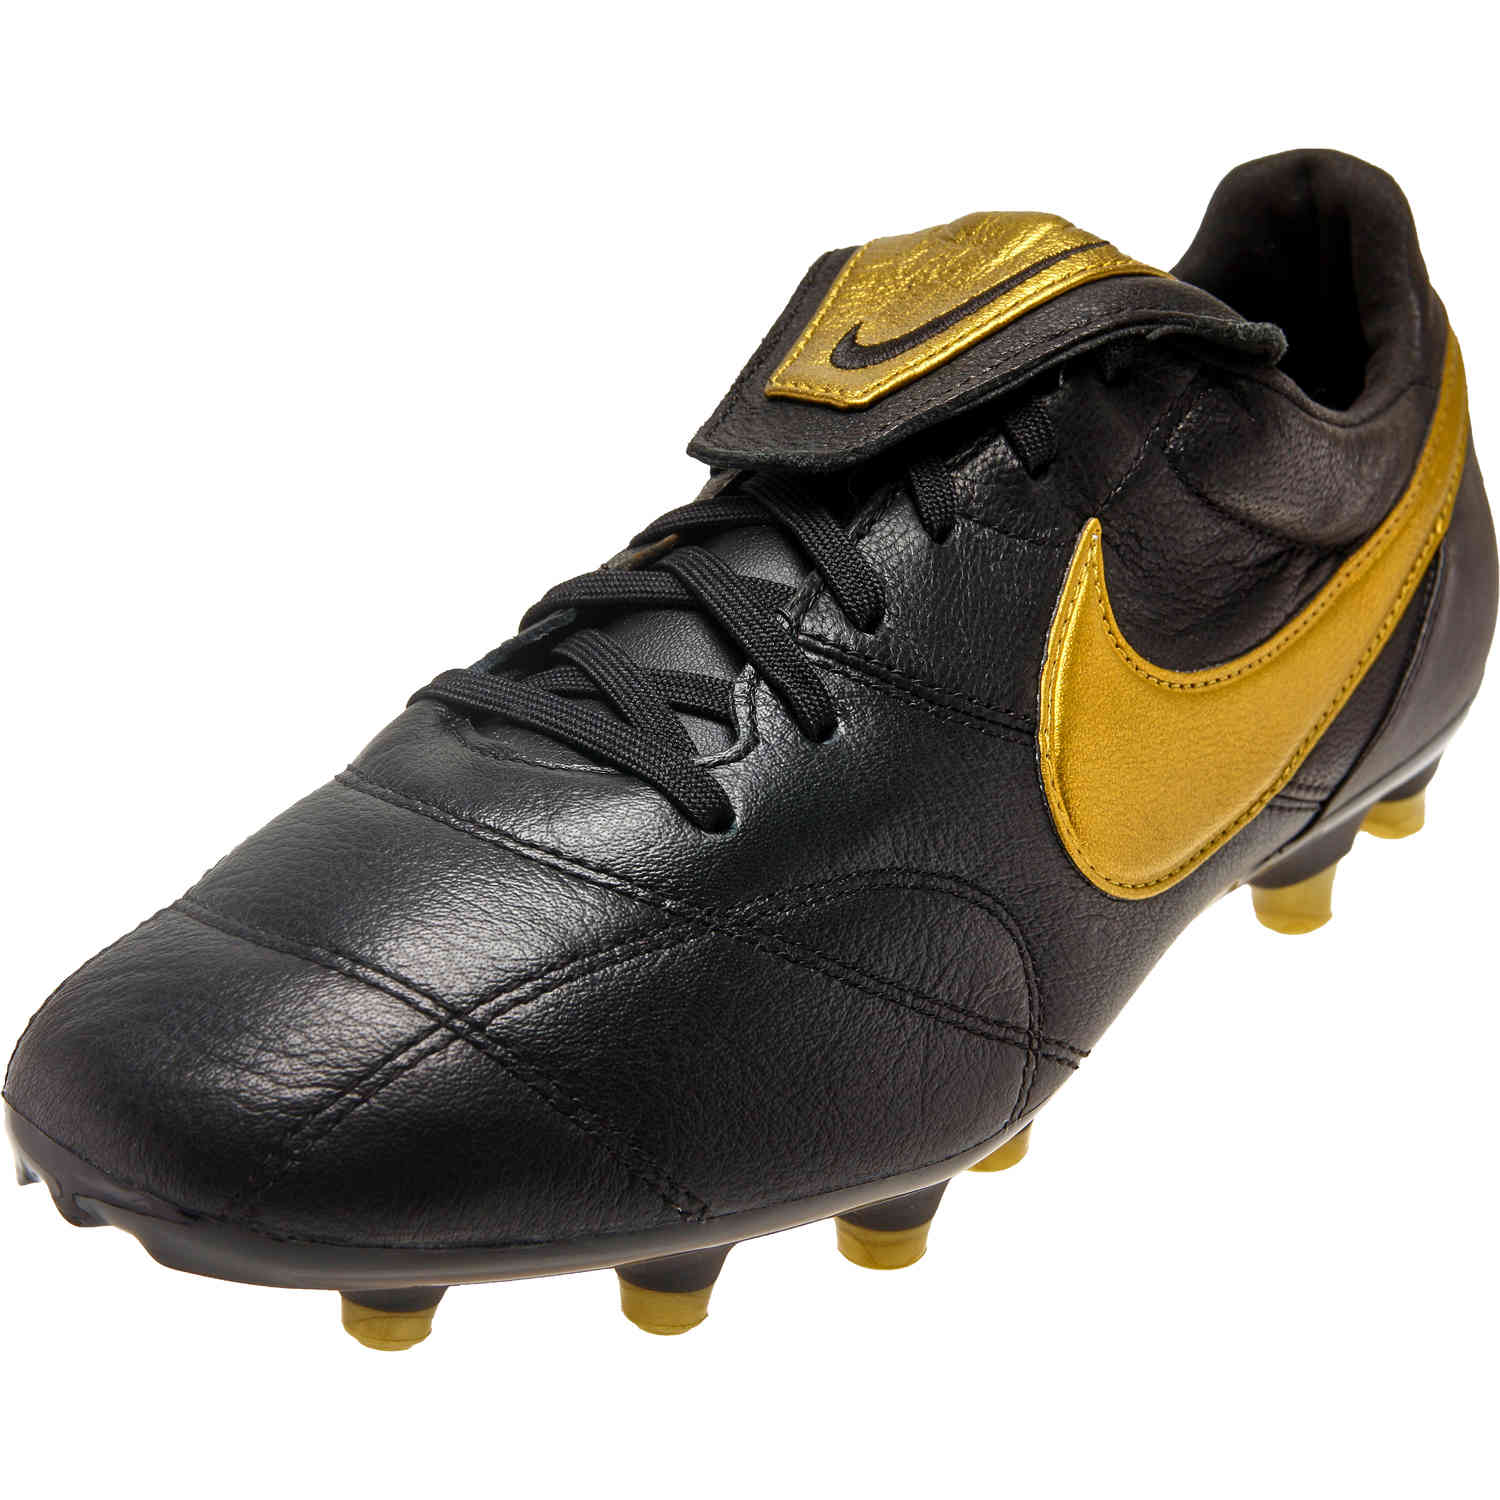 nike premier black and gold